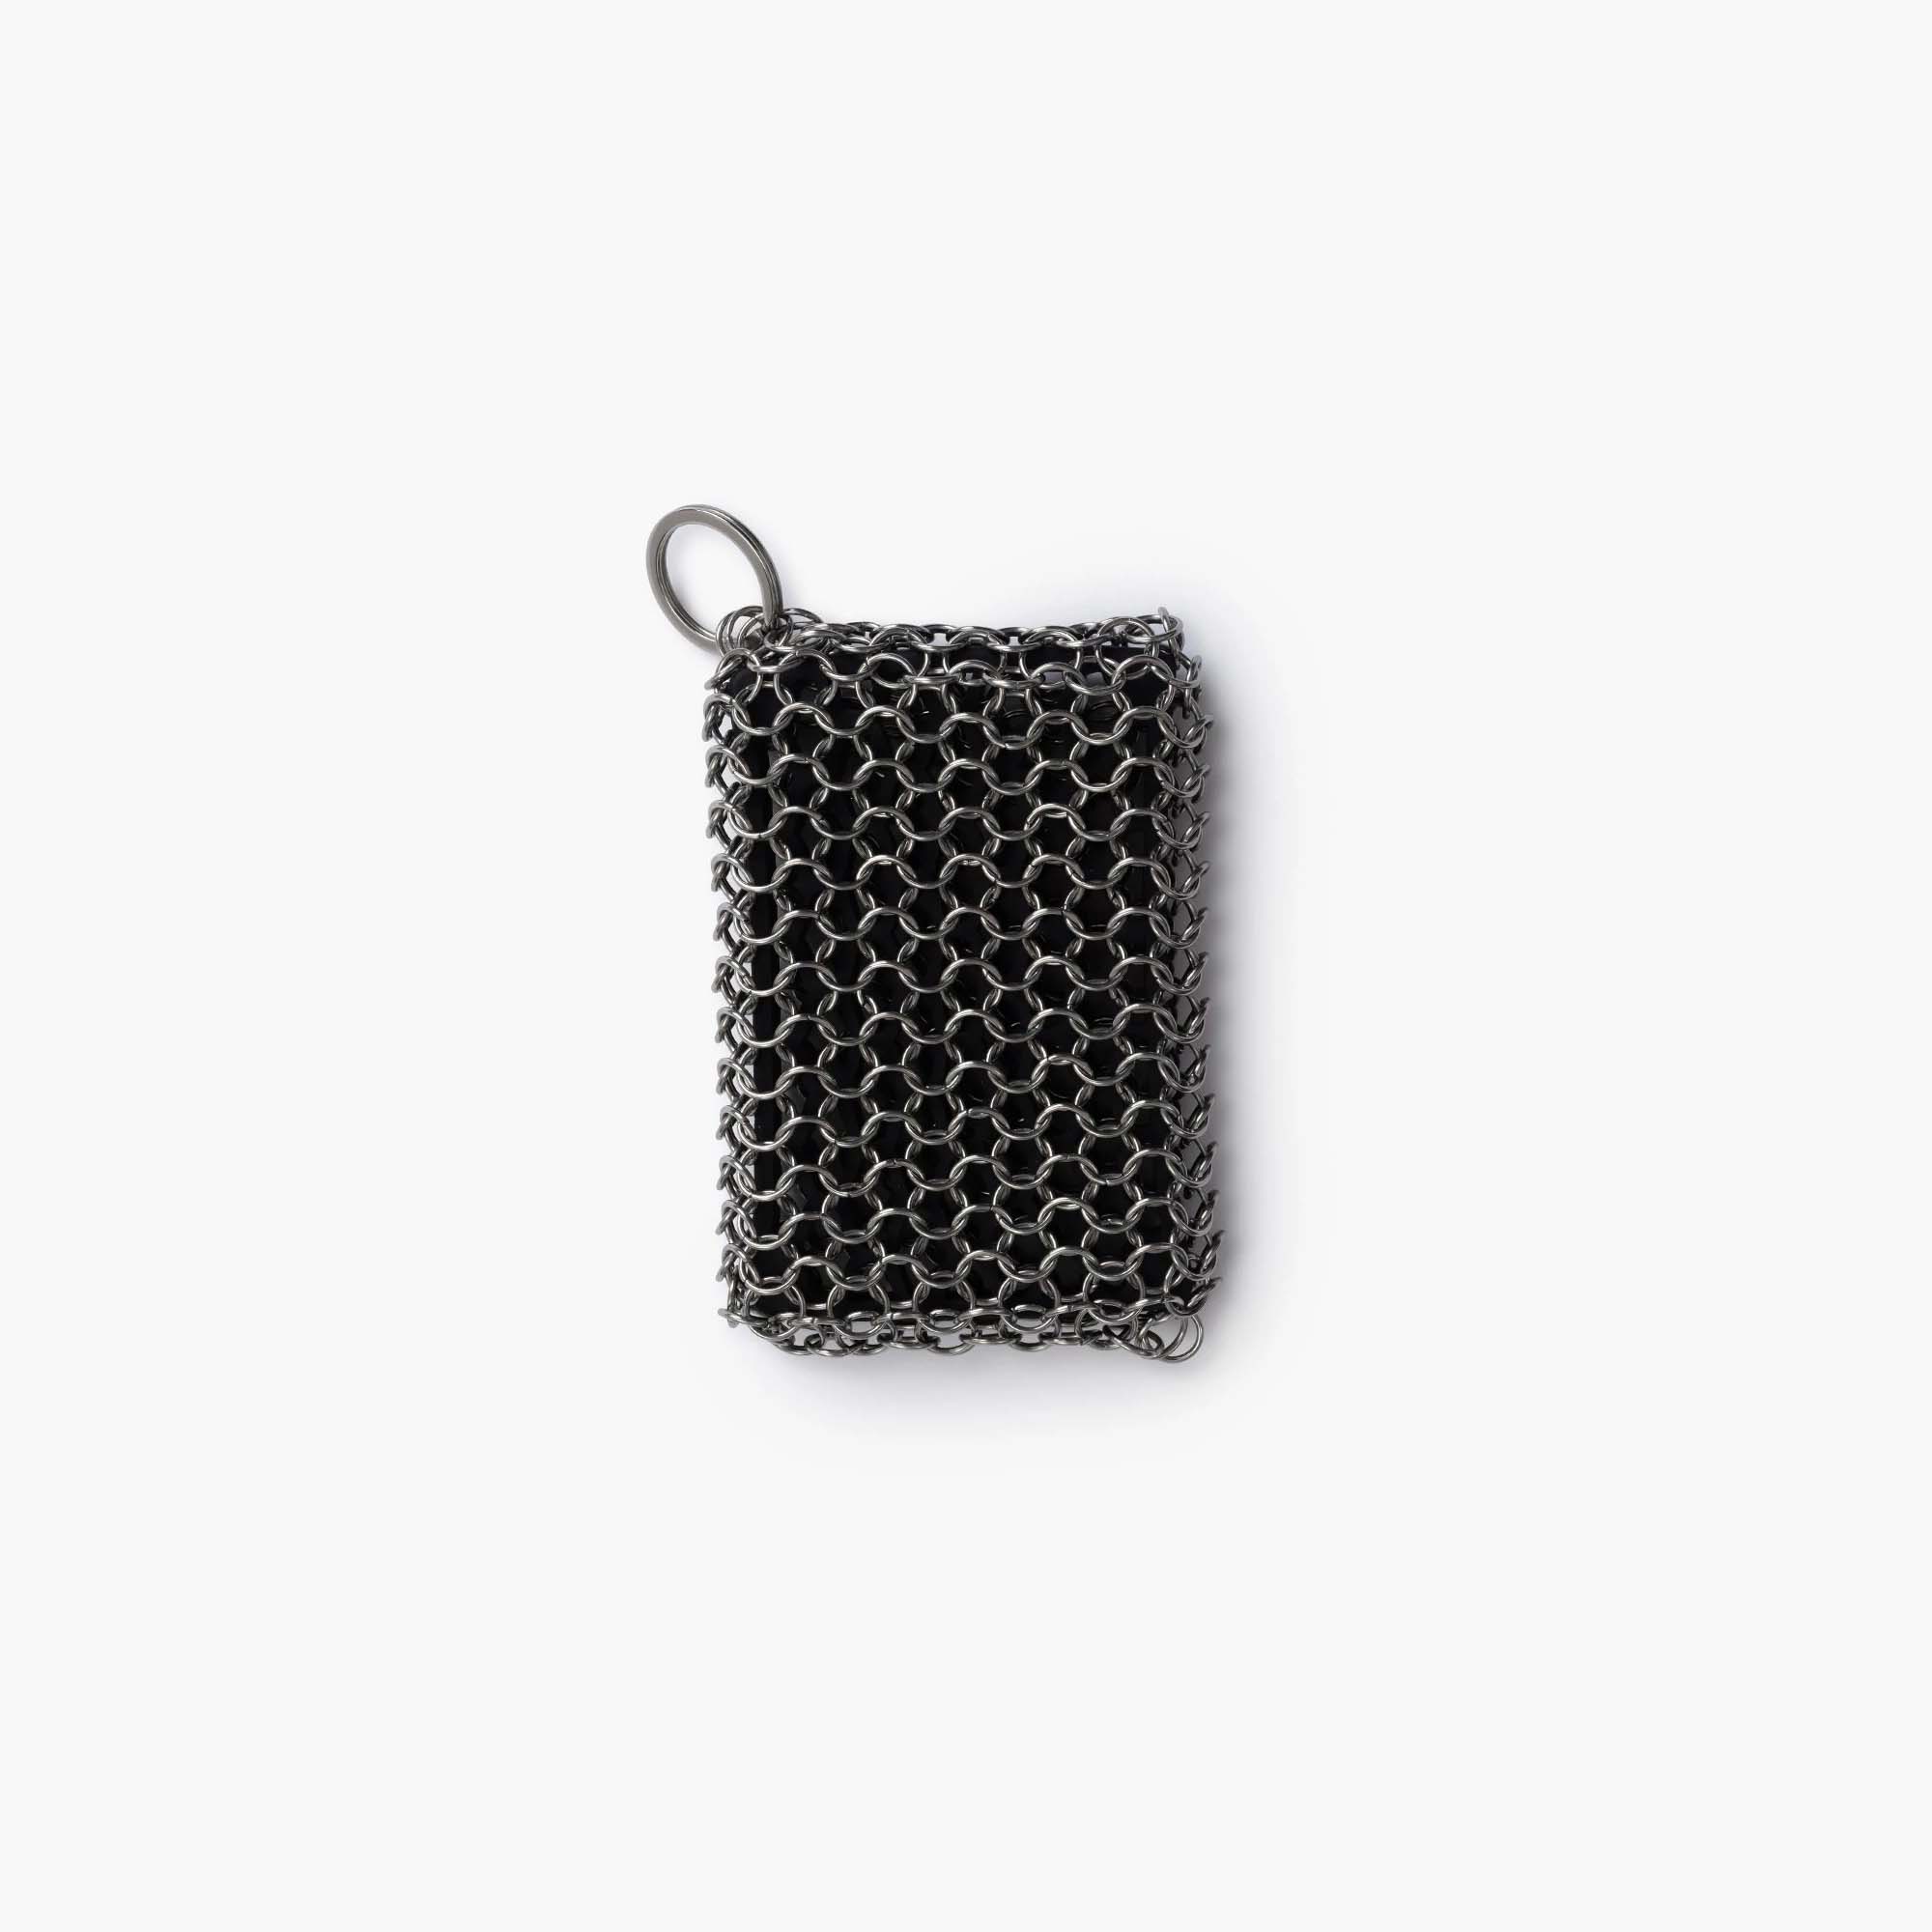 Stainless Steel Mesh Bag Silicone Cleaning Brush Scrubber